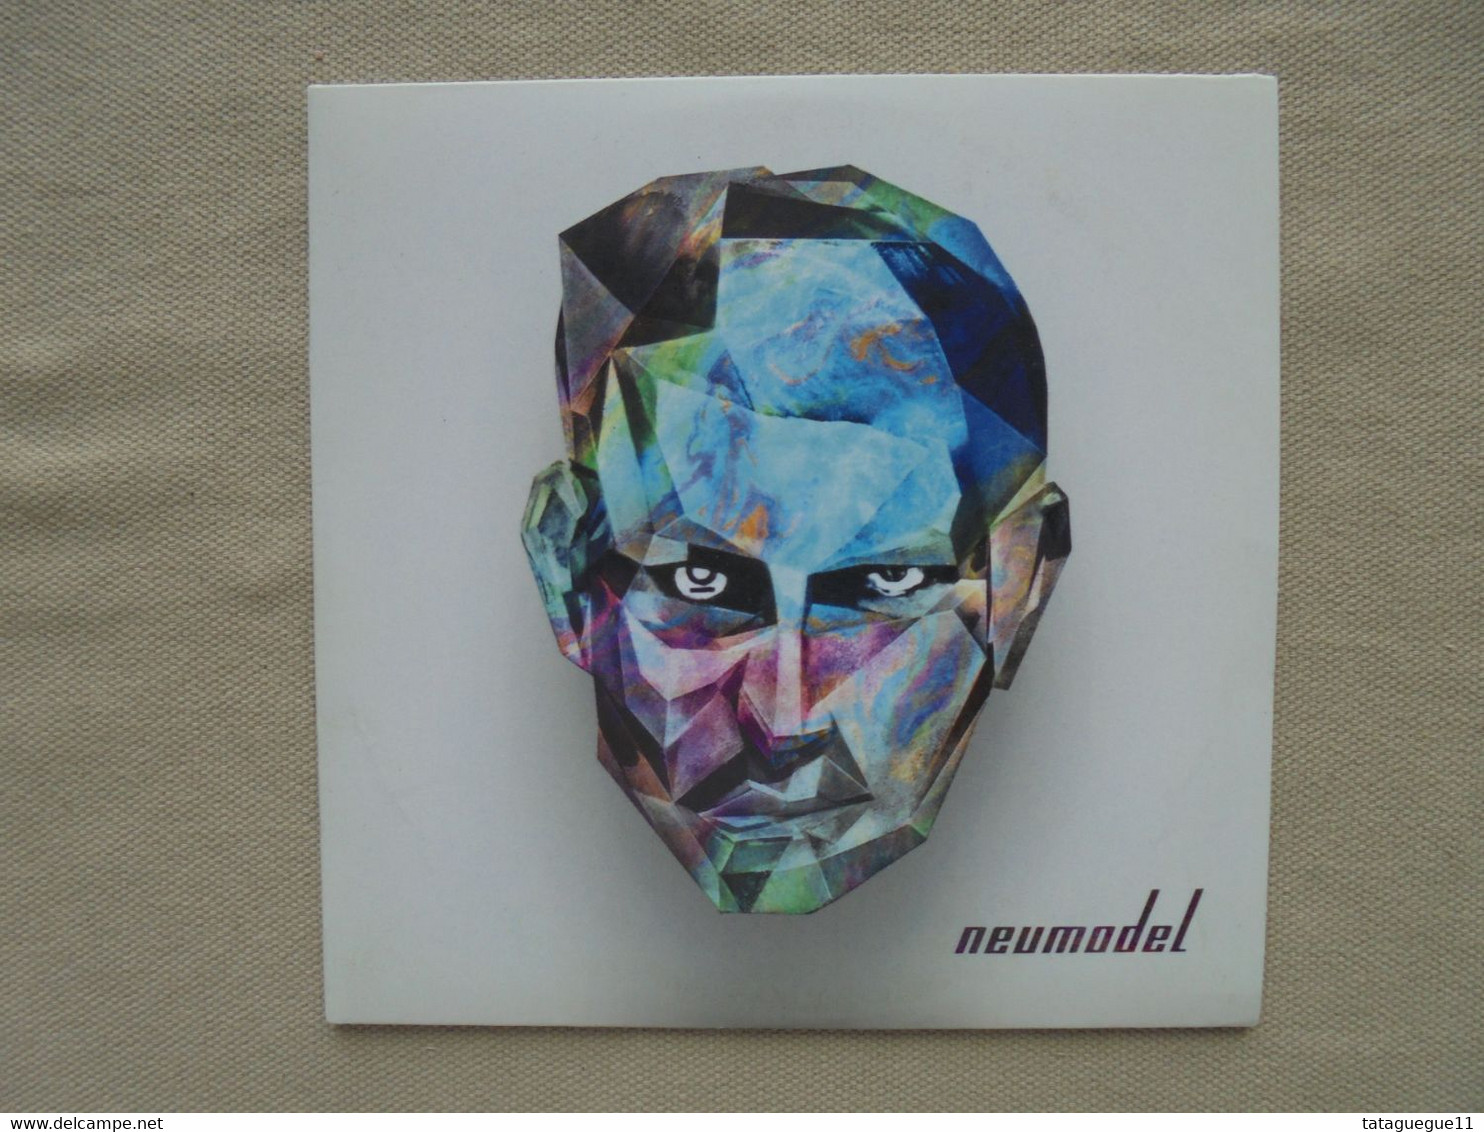 CD - NEUMODEL - Mechanical - Word Up Records - 2016 - Rock